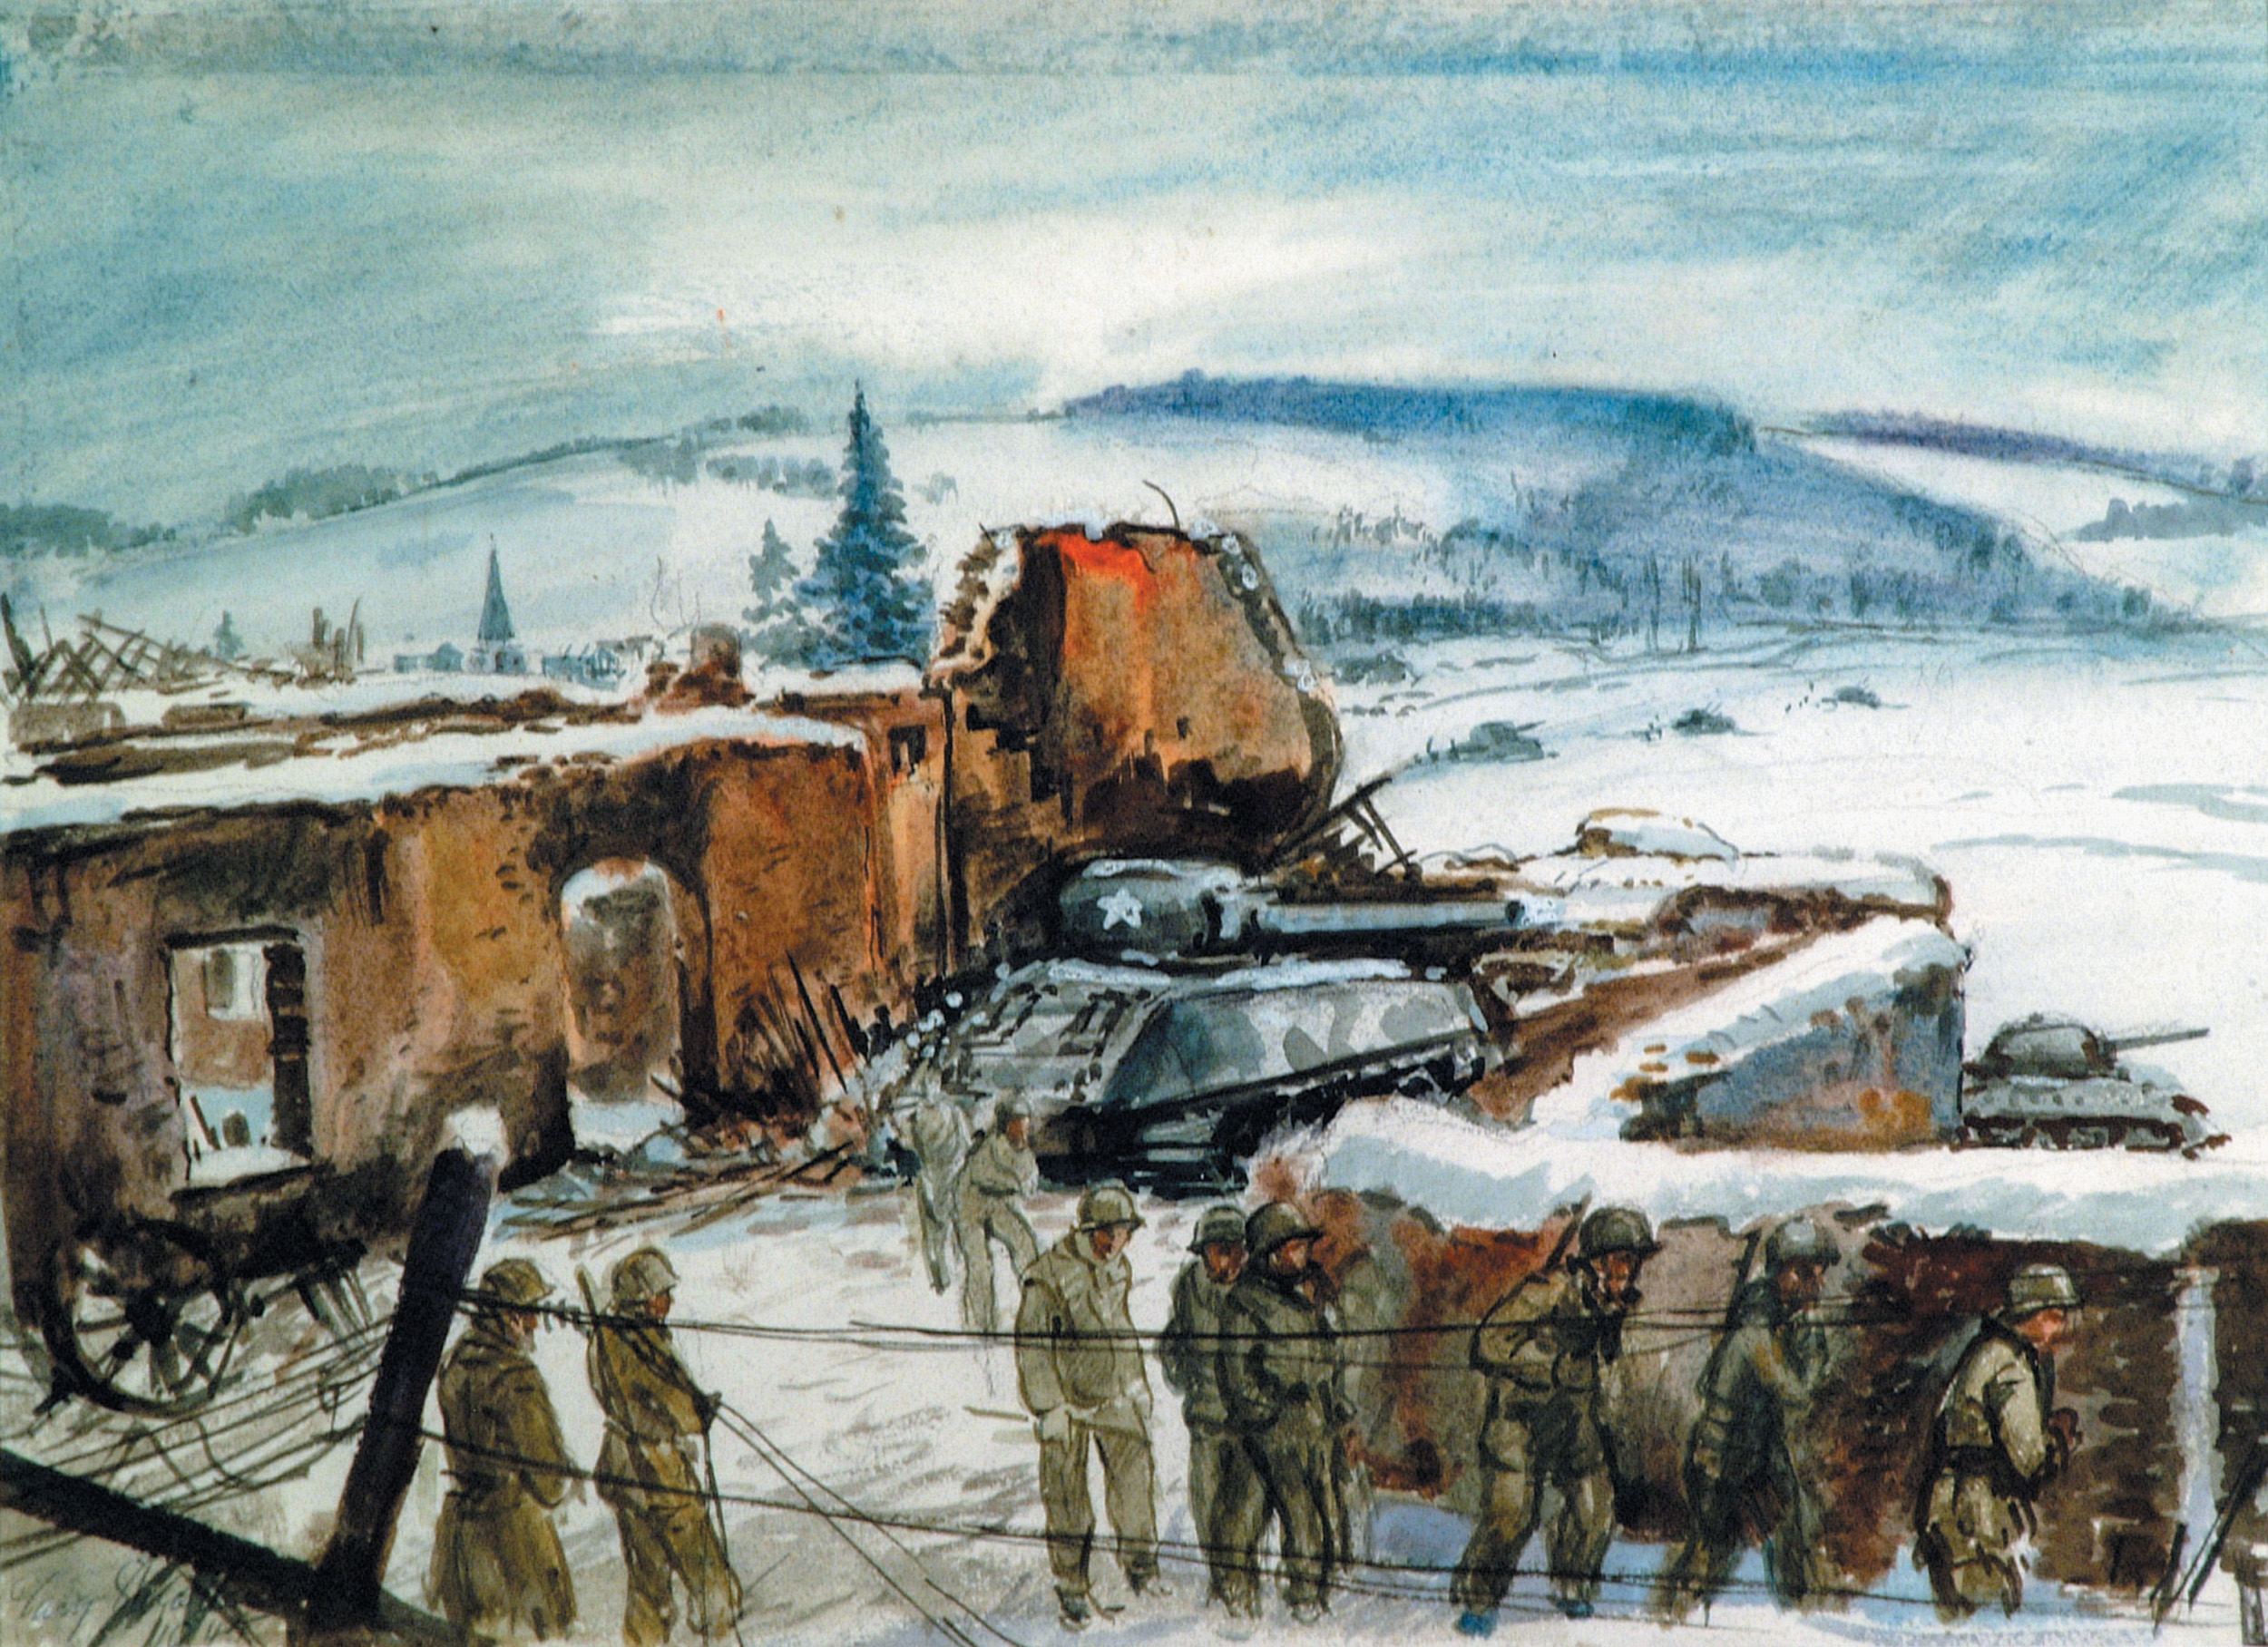 In this watercolor by an U.S. Army artist, battle weary U.S. infantry and armor units find cover in the remains of a Belgian village.